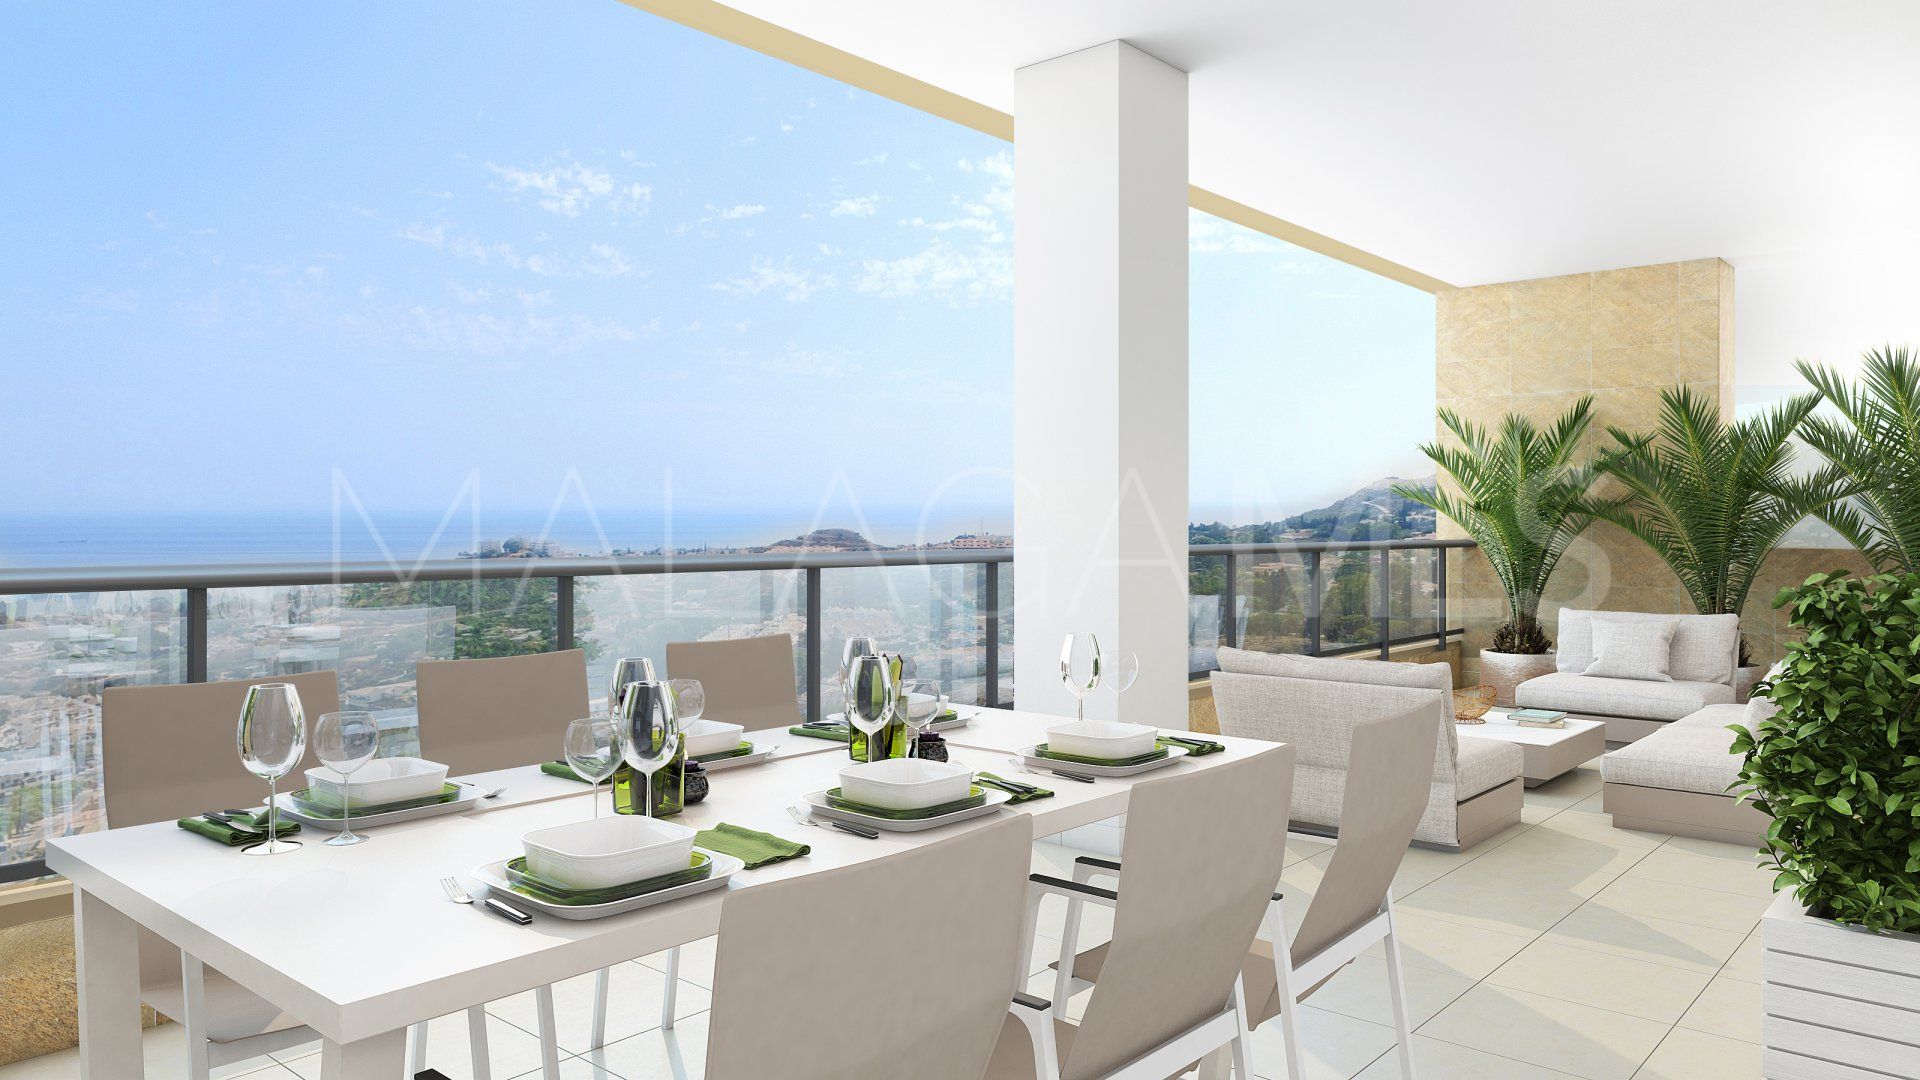 Wohnung for sale in Benalmadena